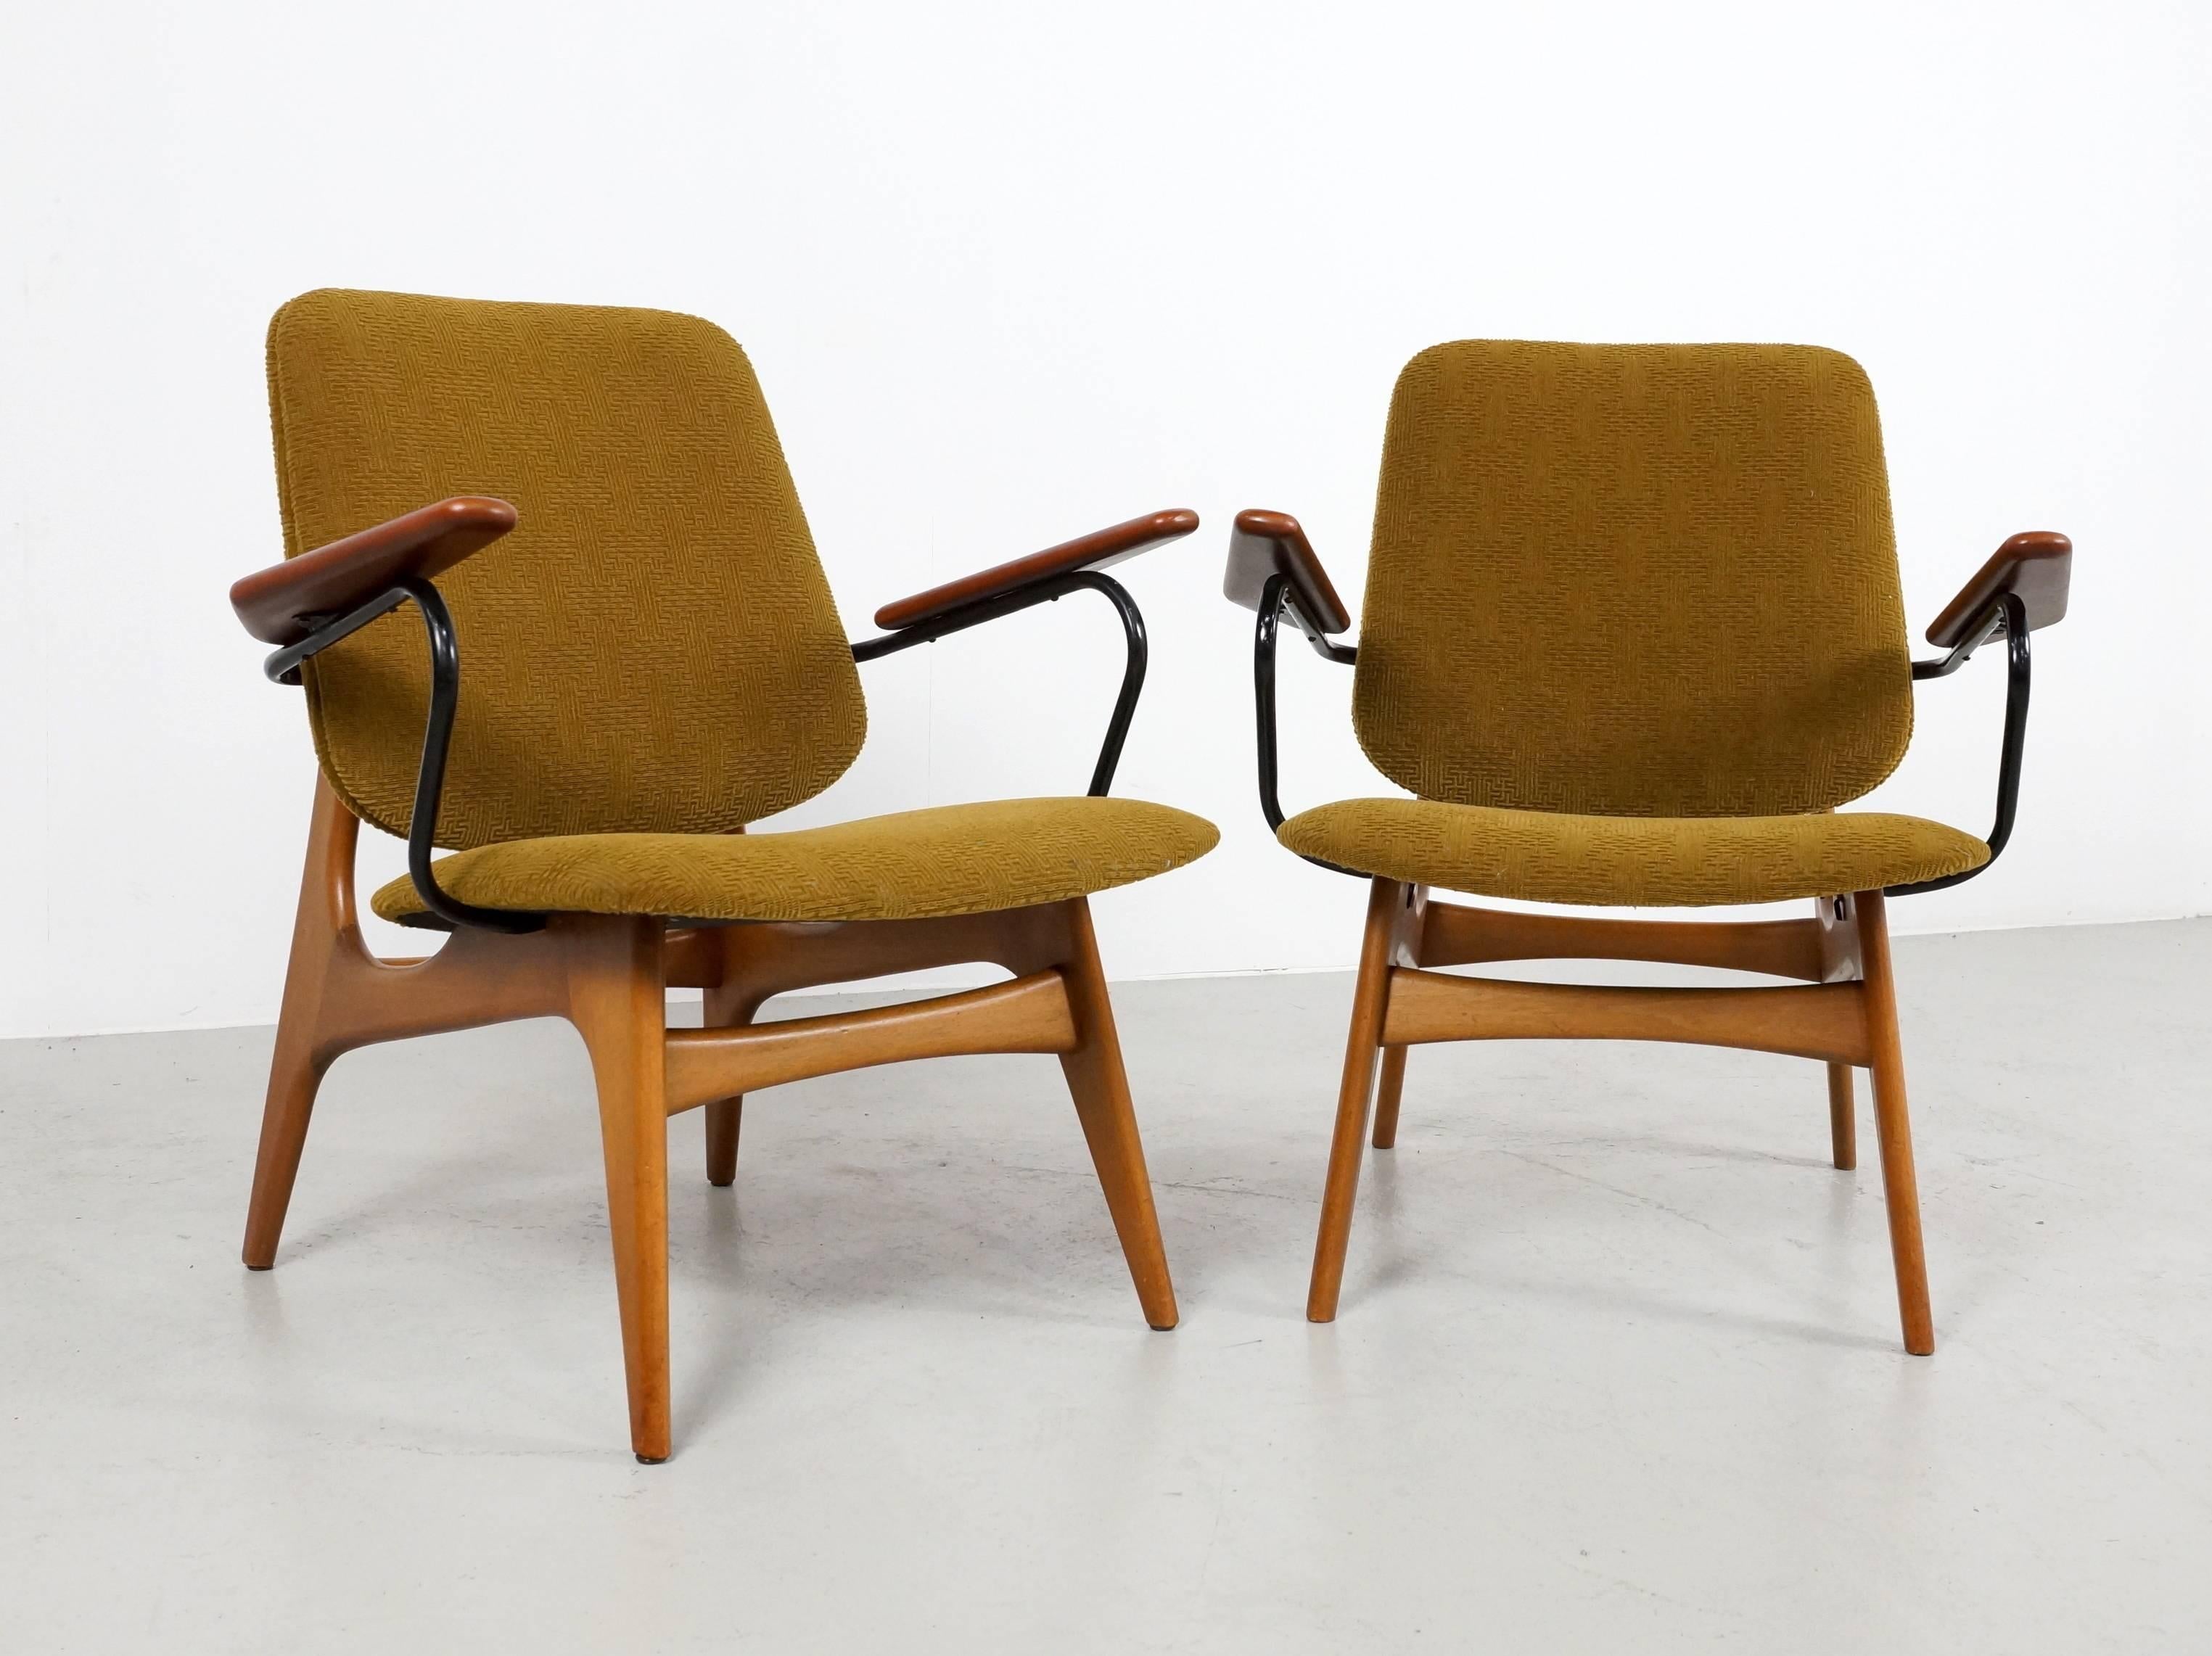 Pair of 1960s Dutch modernist easy chairs on a teak wooden base. The organic shaped teak armrest are supported by a black metal tube under-need. 
The chairs are newly upholstered in a highly exclusive textured fabric original from the 1960s.